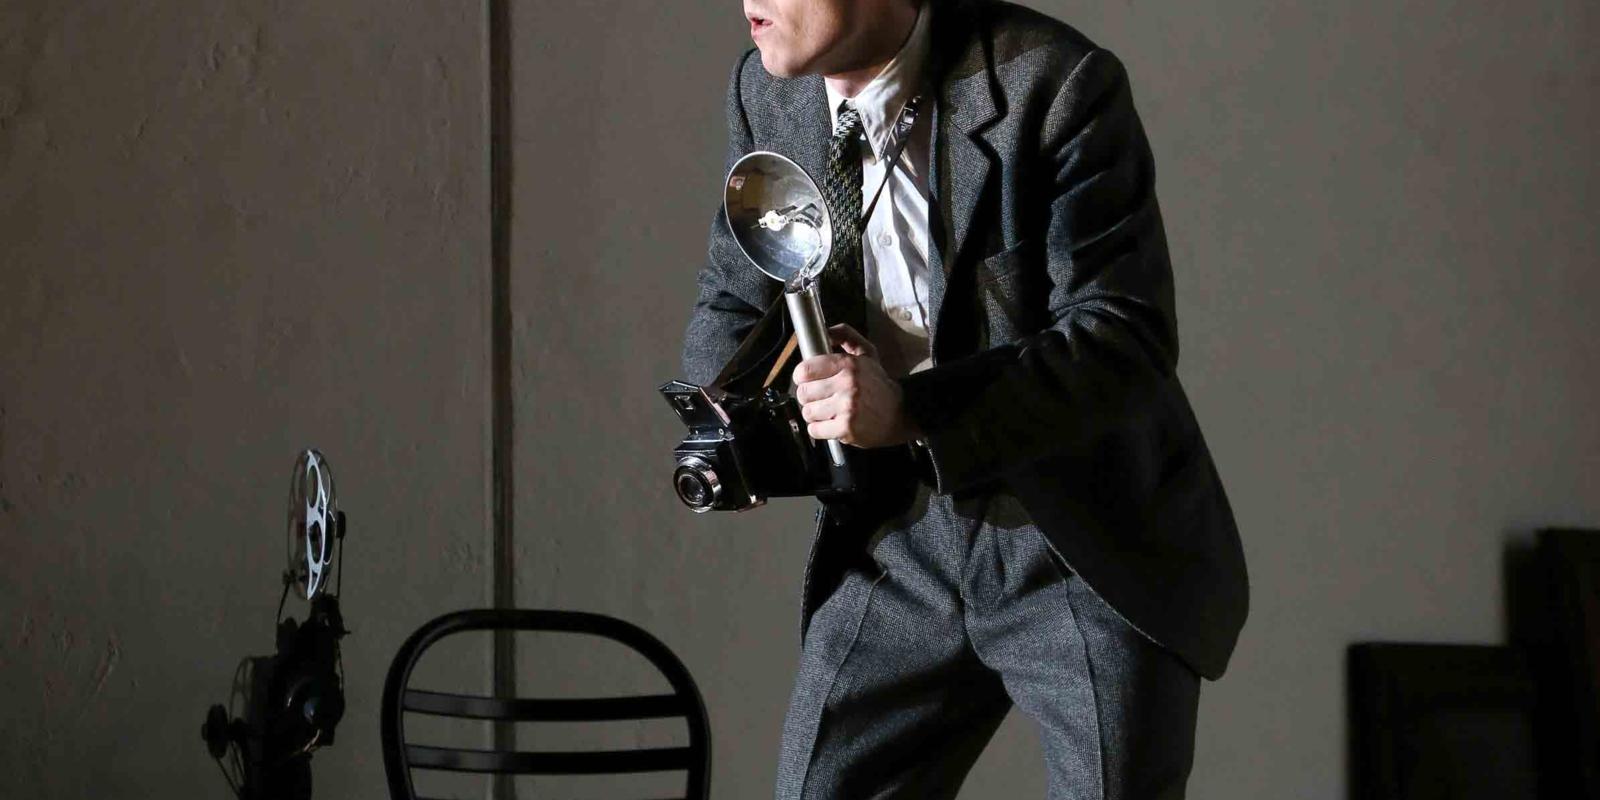 a man in a suit, holding a camera